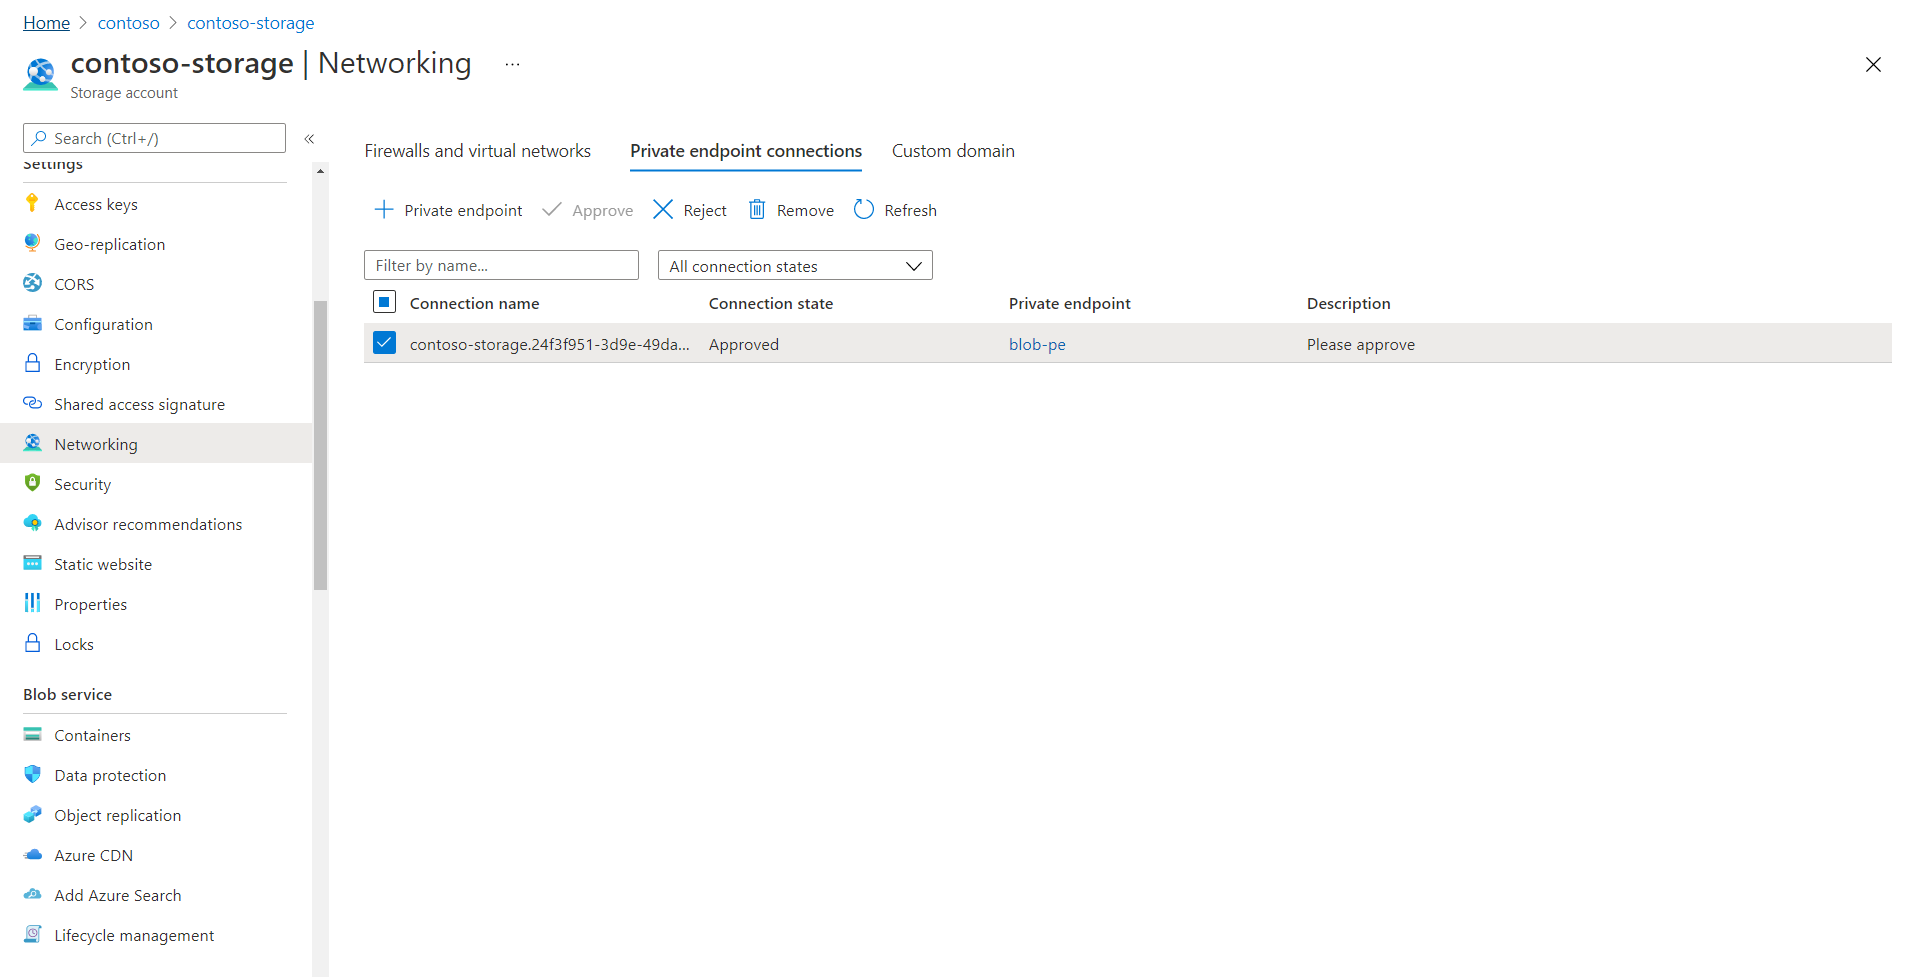 Screenshot of the Azure portal, showing an "Approved" status on the "Private endpoint connections" pane.